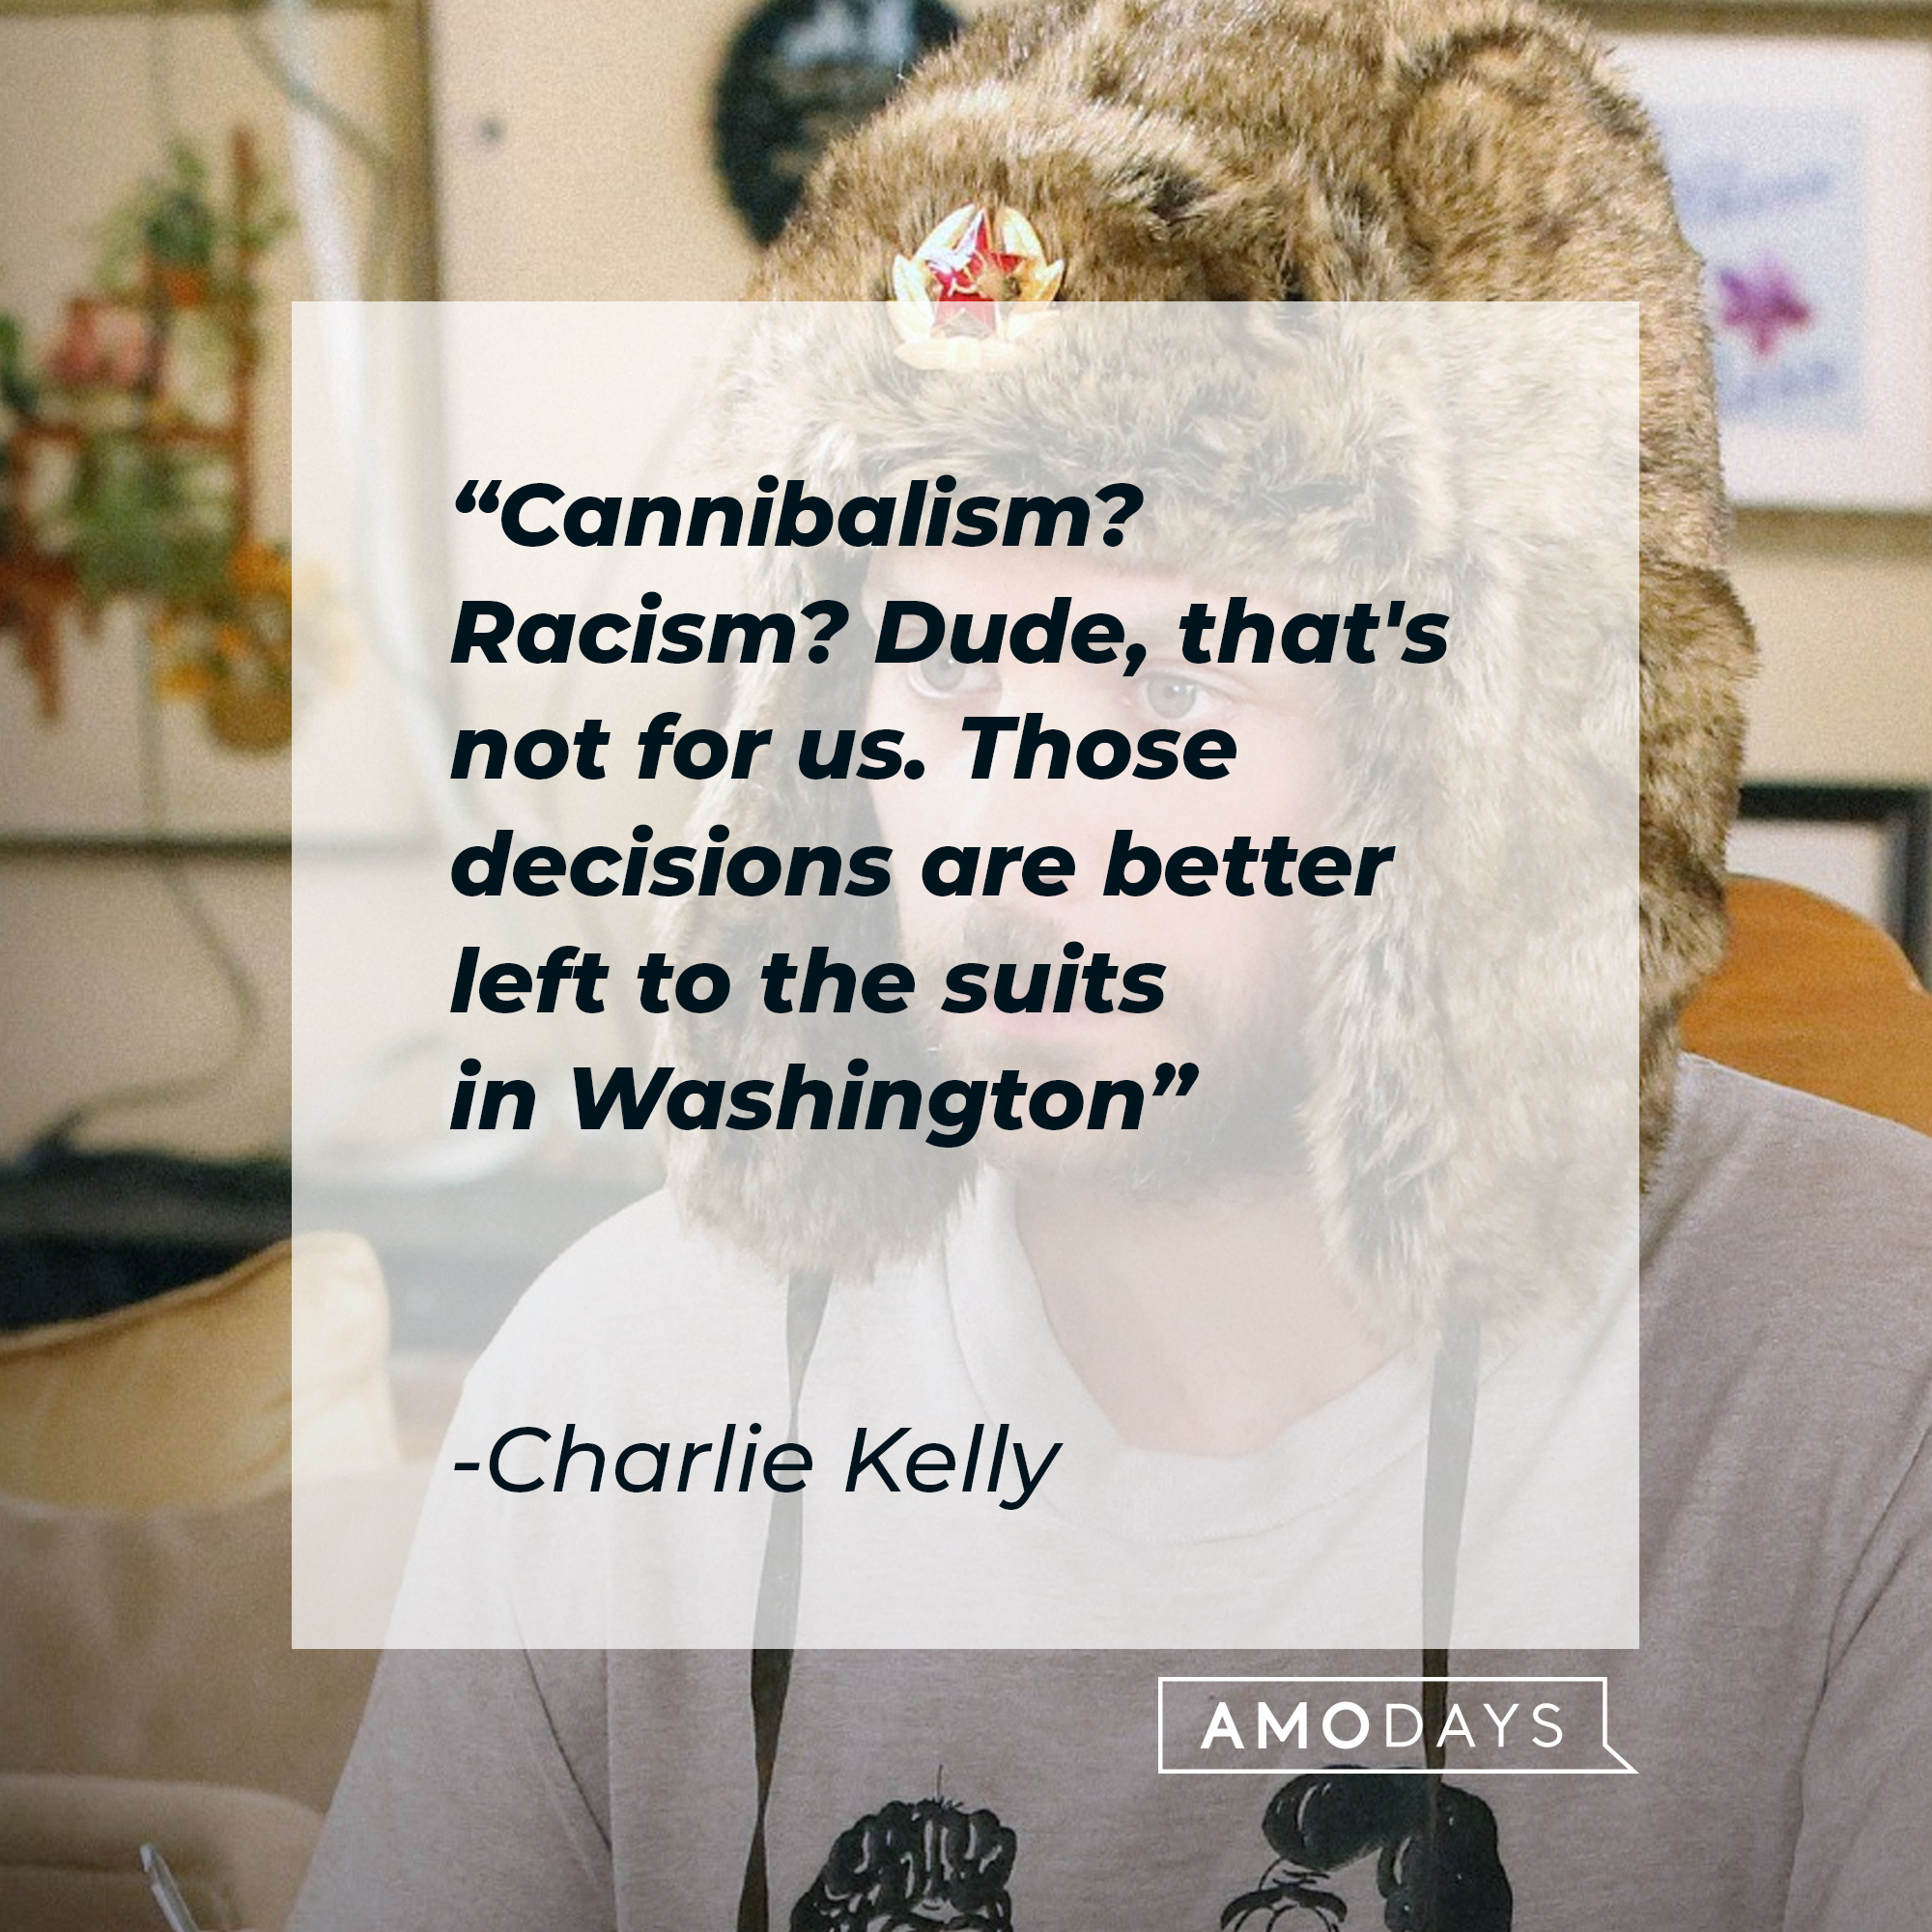 Charlie Kelly with his quote: "Cannibalism? Racism? Dude, that's not for us. Those decisions are better left to the suits in Washington." | Source: Facebook/alwayssunny